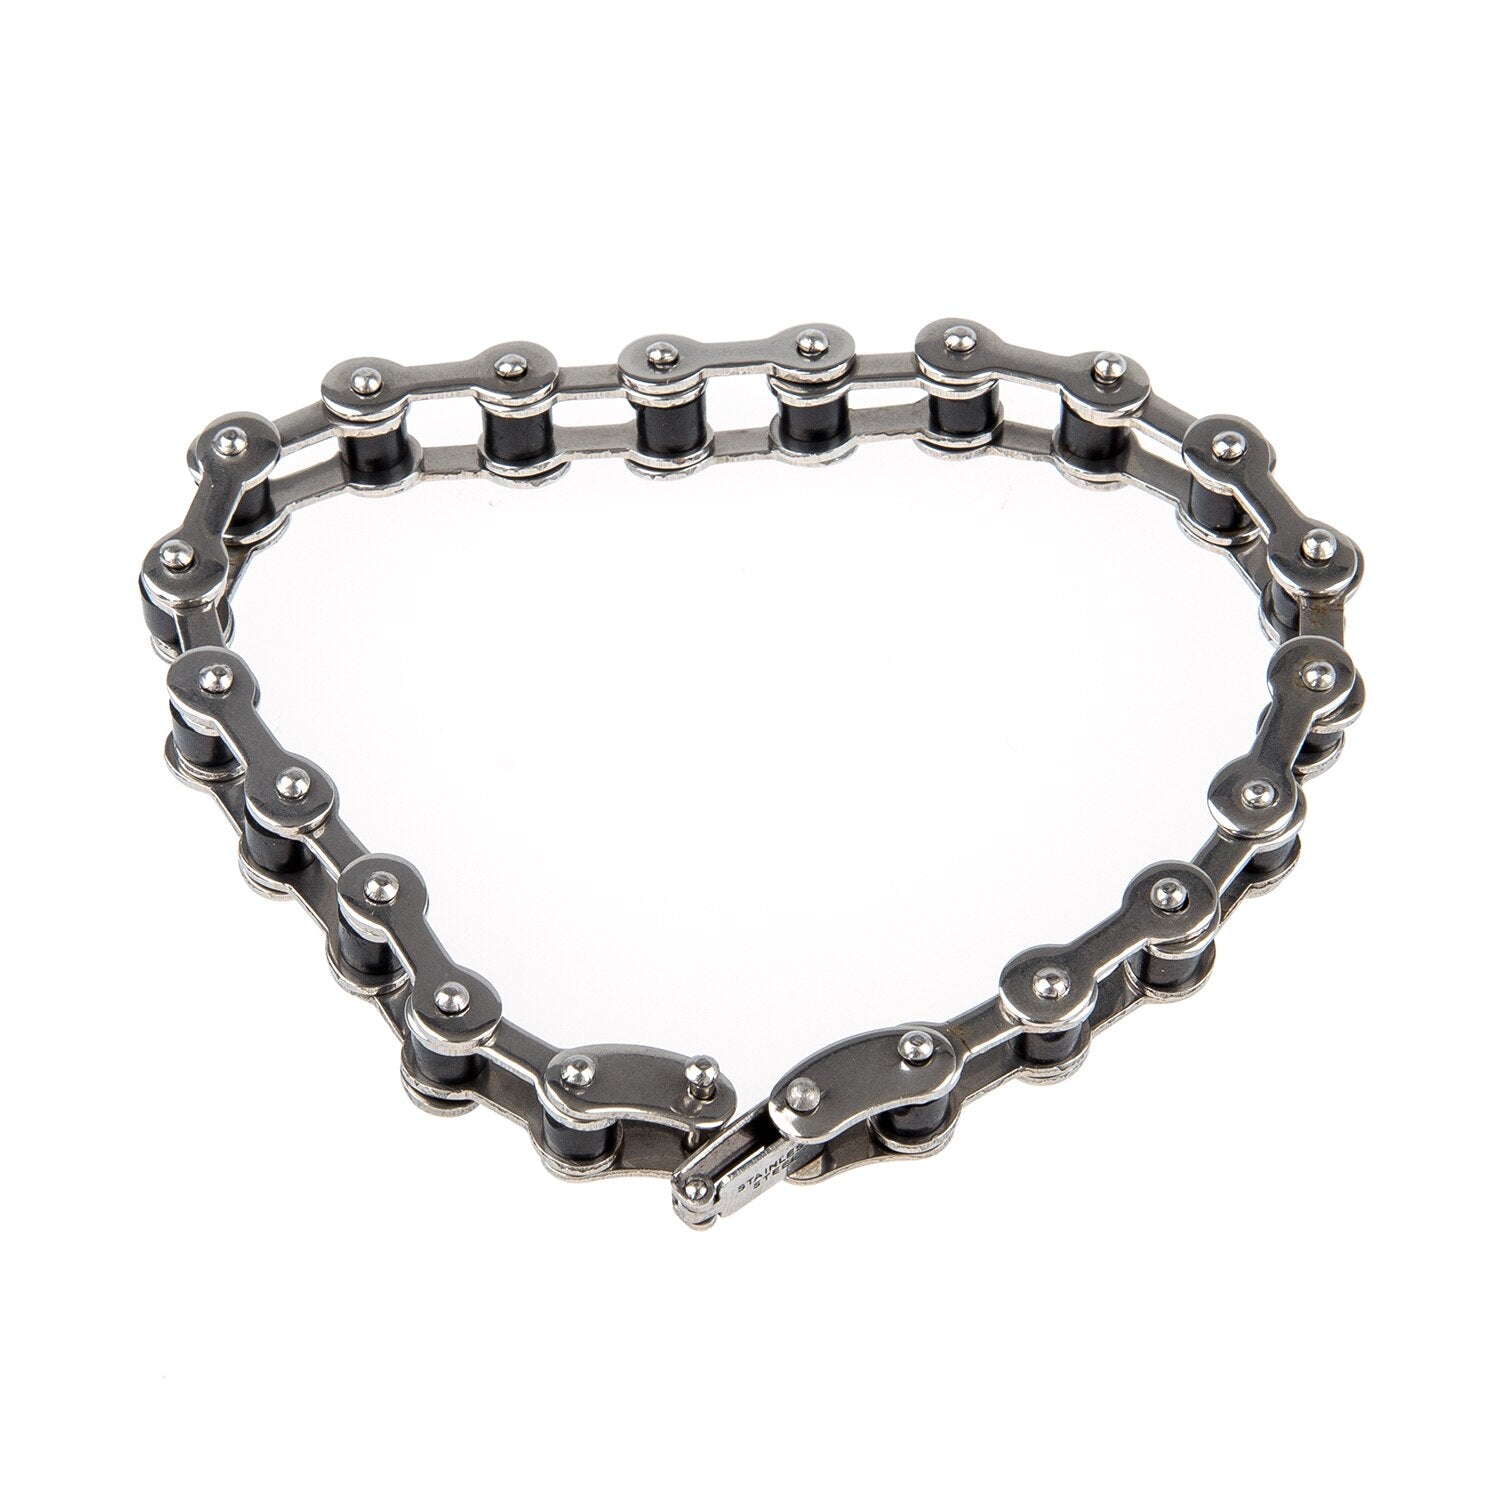 Stainless Steel Rubber Bicycle Chain Bracelet Bangle 0.4" - ebowsos